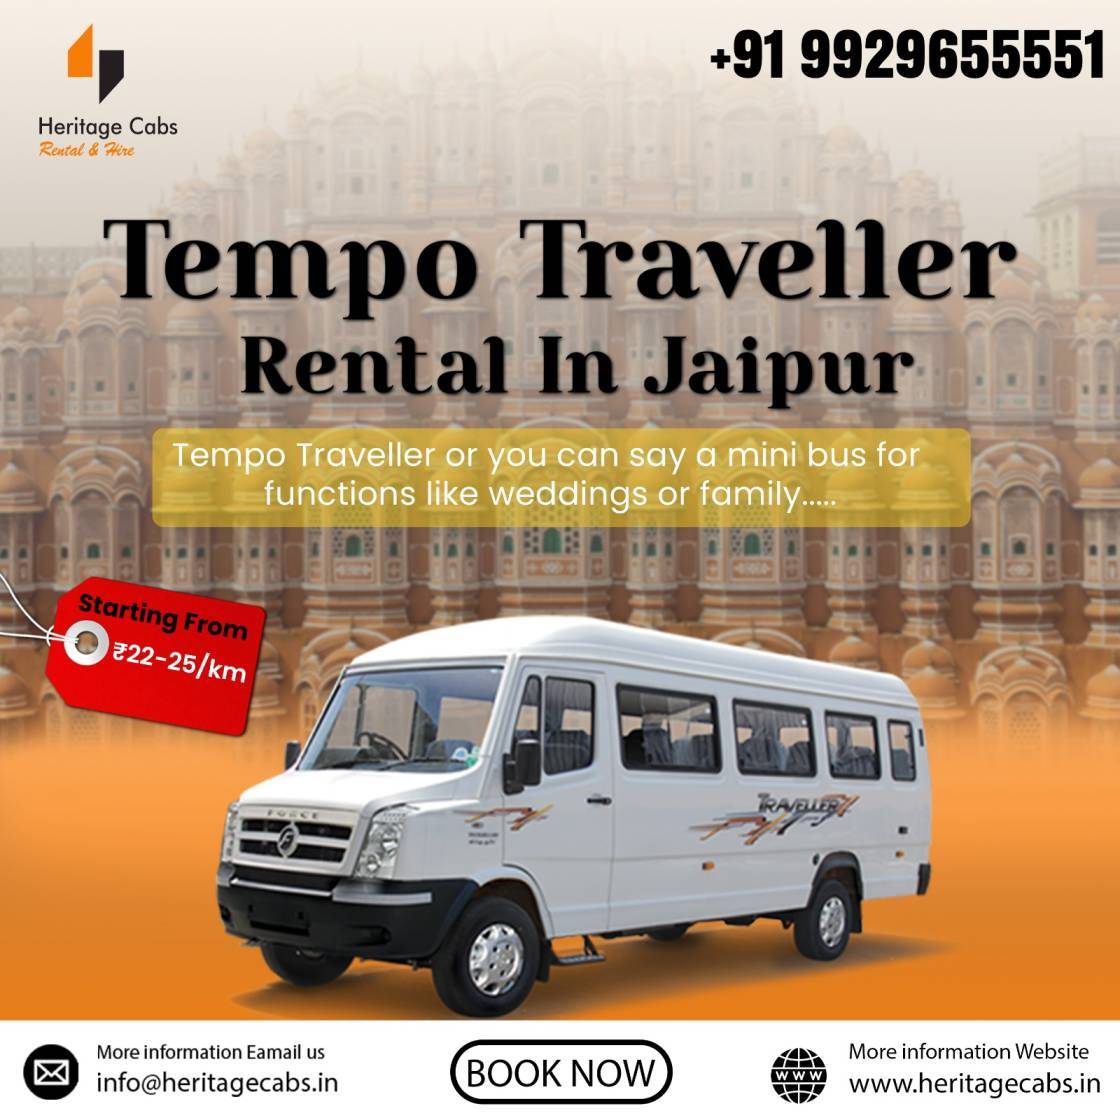 Tempo Traveller Hire and Rental Service in Jaipur